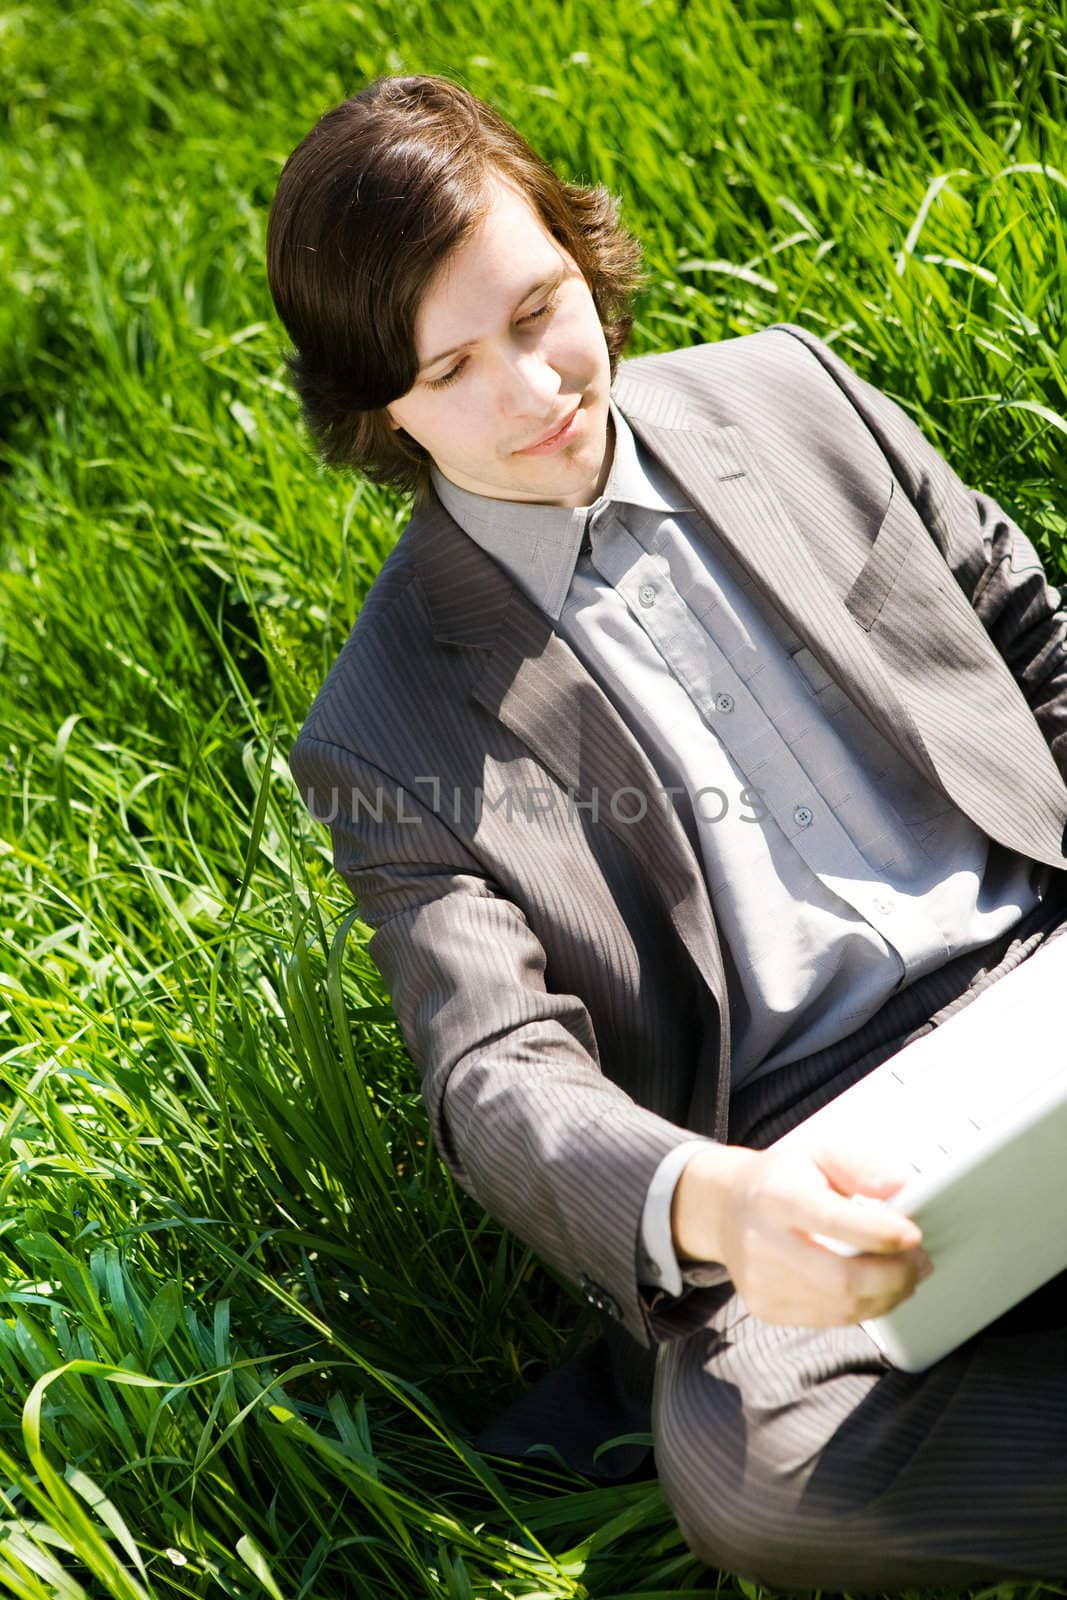 portrait of businessman with notebook on green grass field